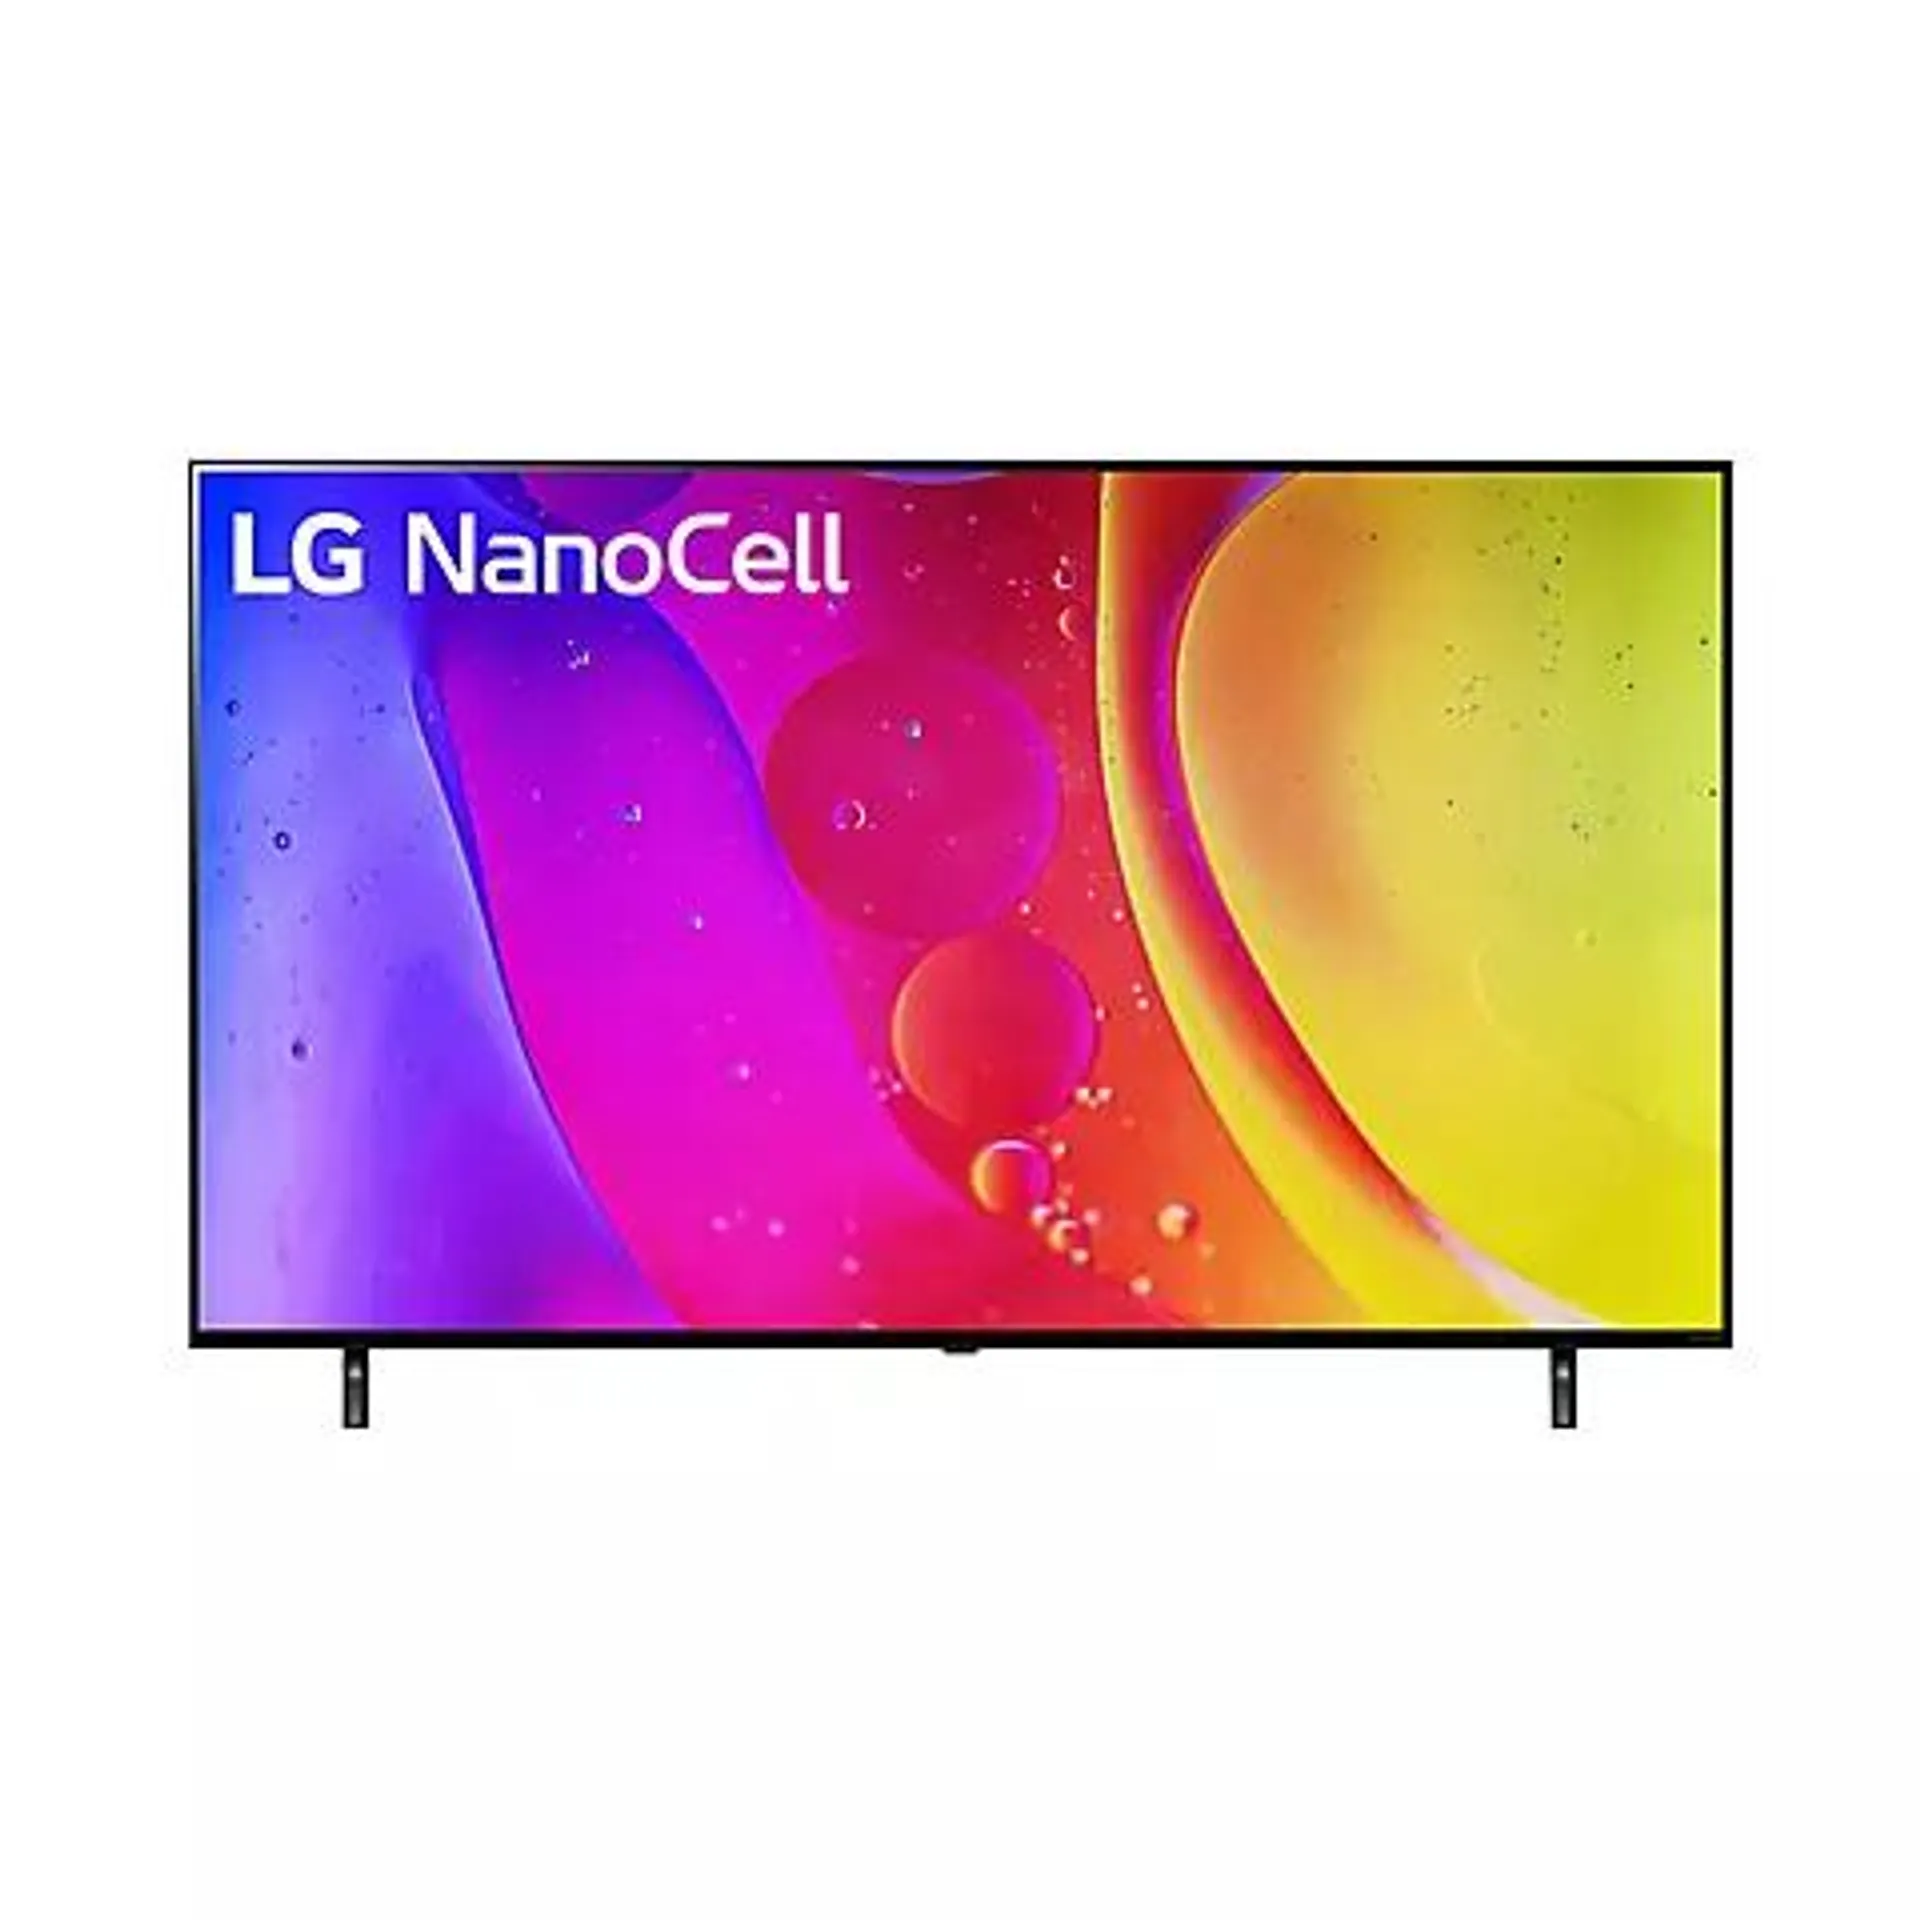 LG 65" NANO80 NanoCell 4K AI ThinQ Smart TV with $75 Streaming Credit and 2-Year Coverage